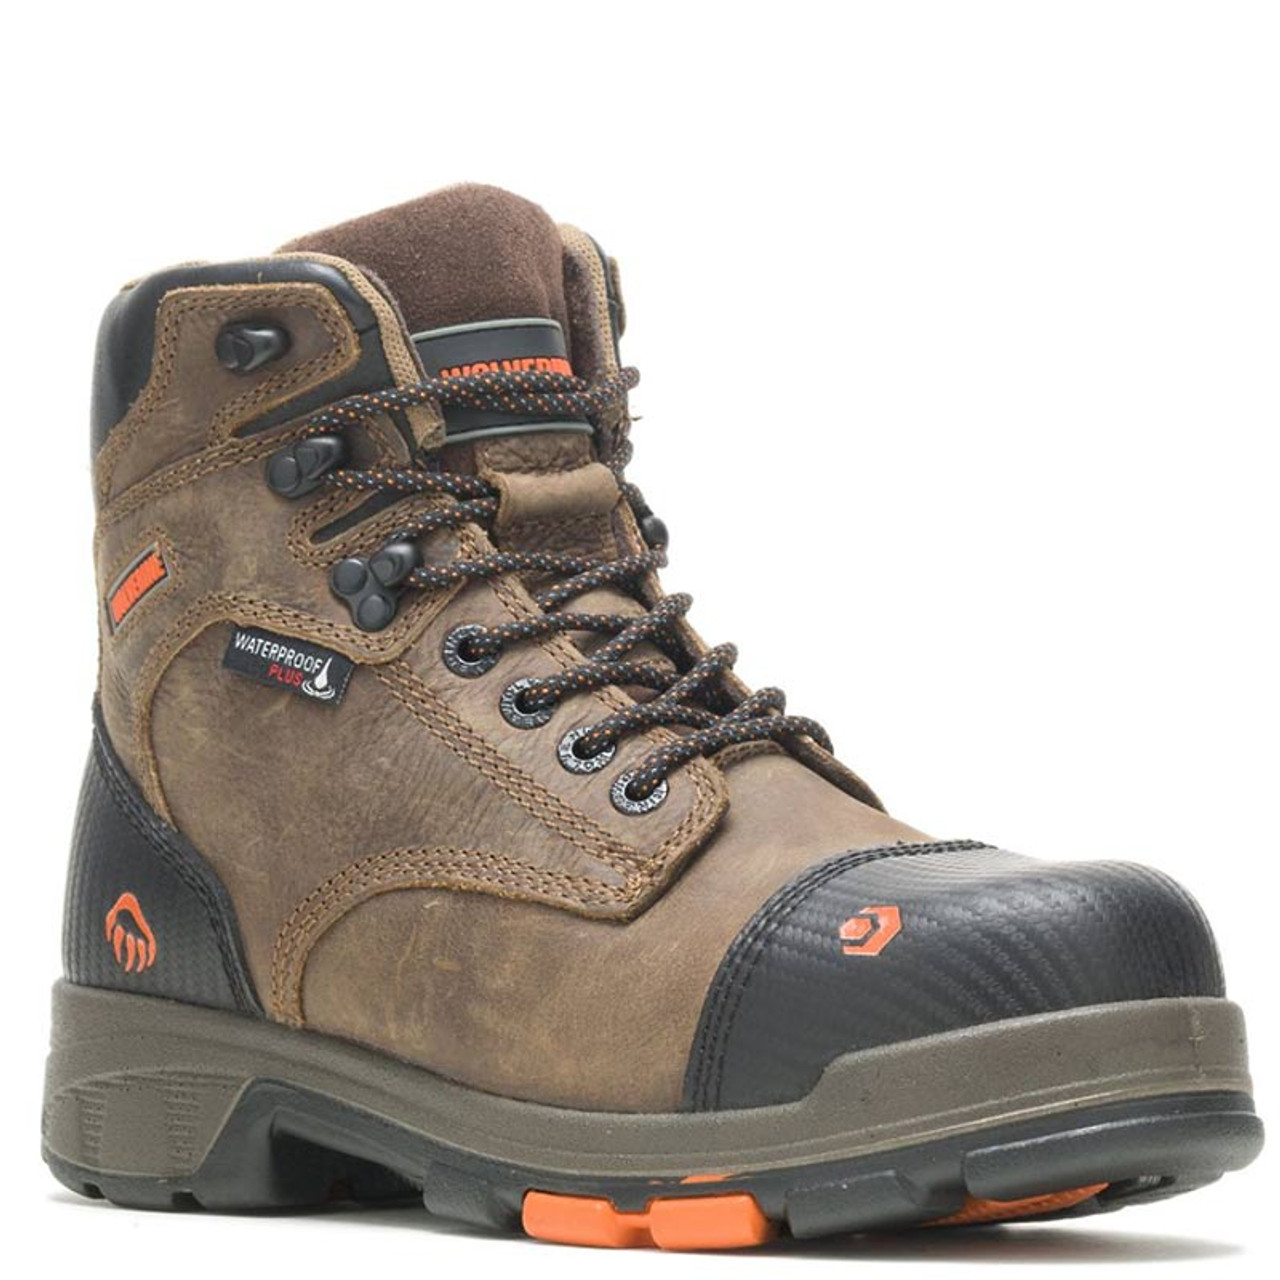 Wolverine Boots - Your Work Boot Headquarters